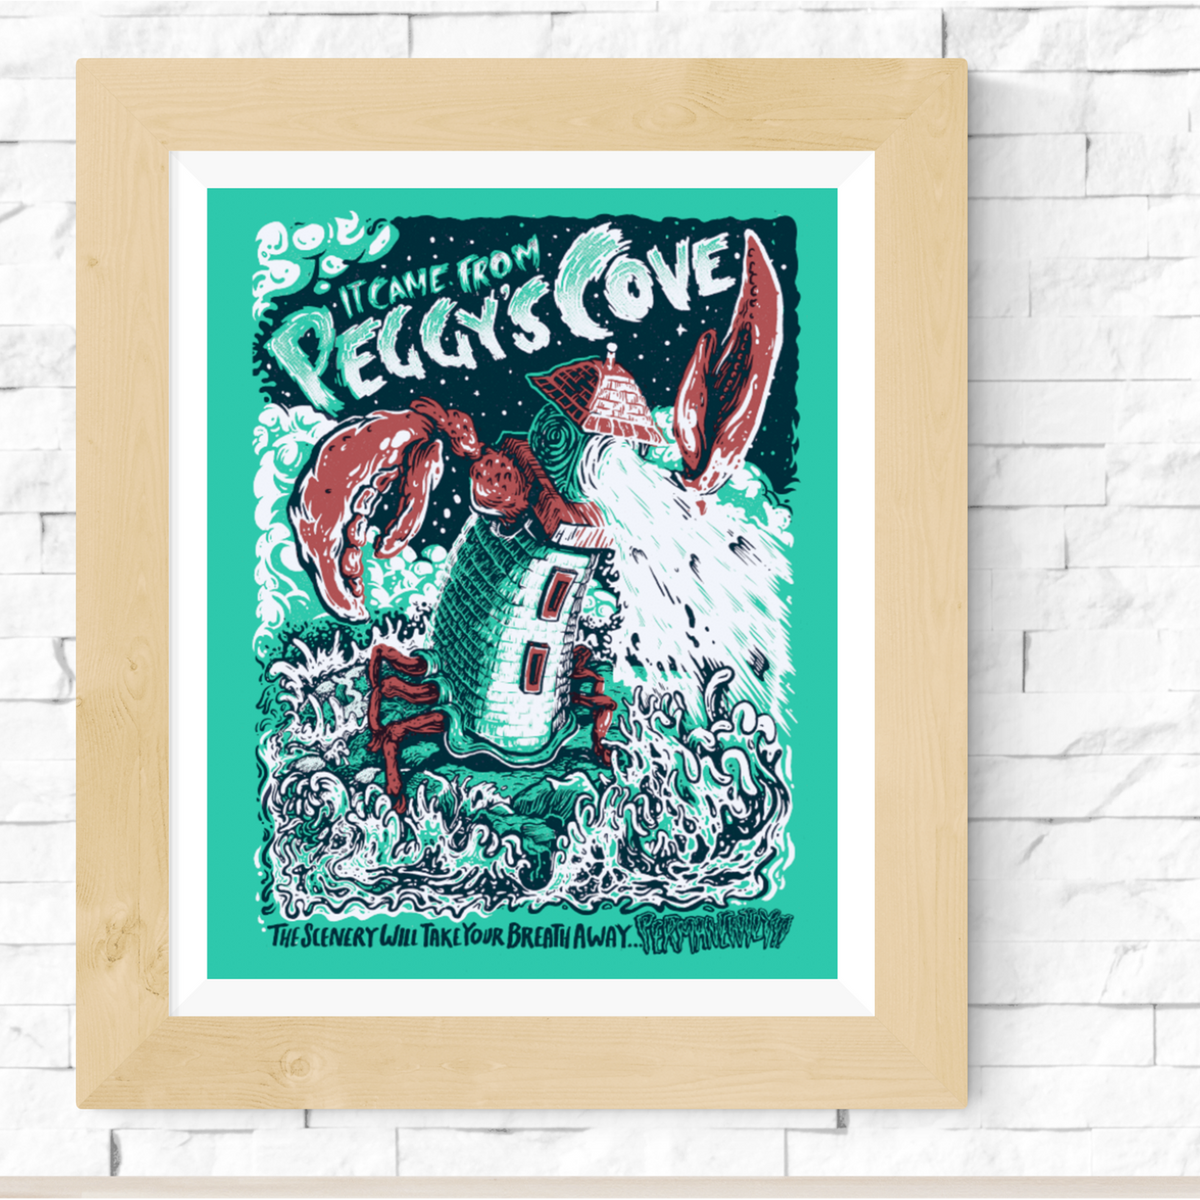 It came from Peggy's Cove - Screenprint